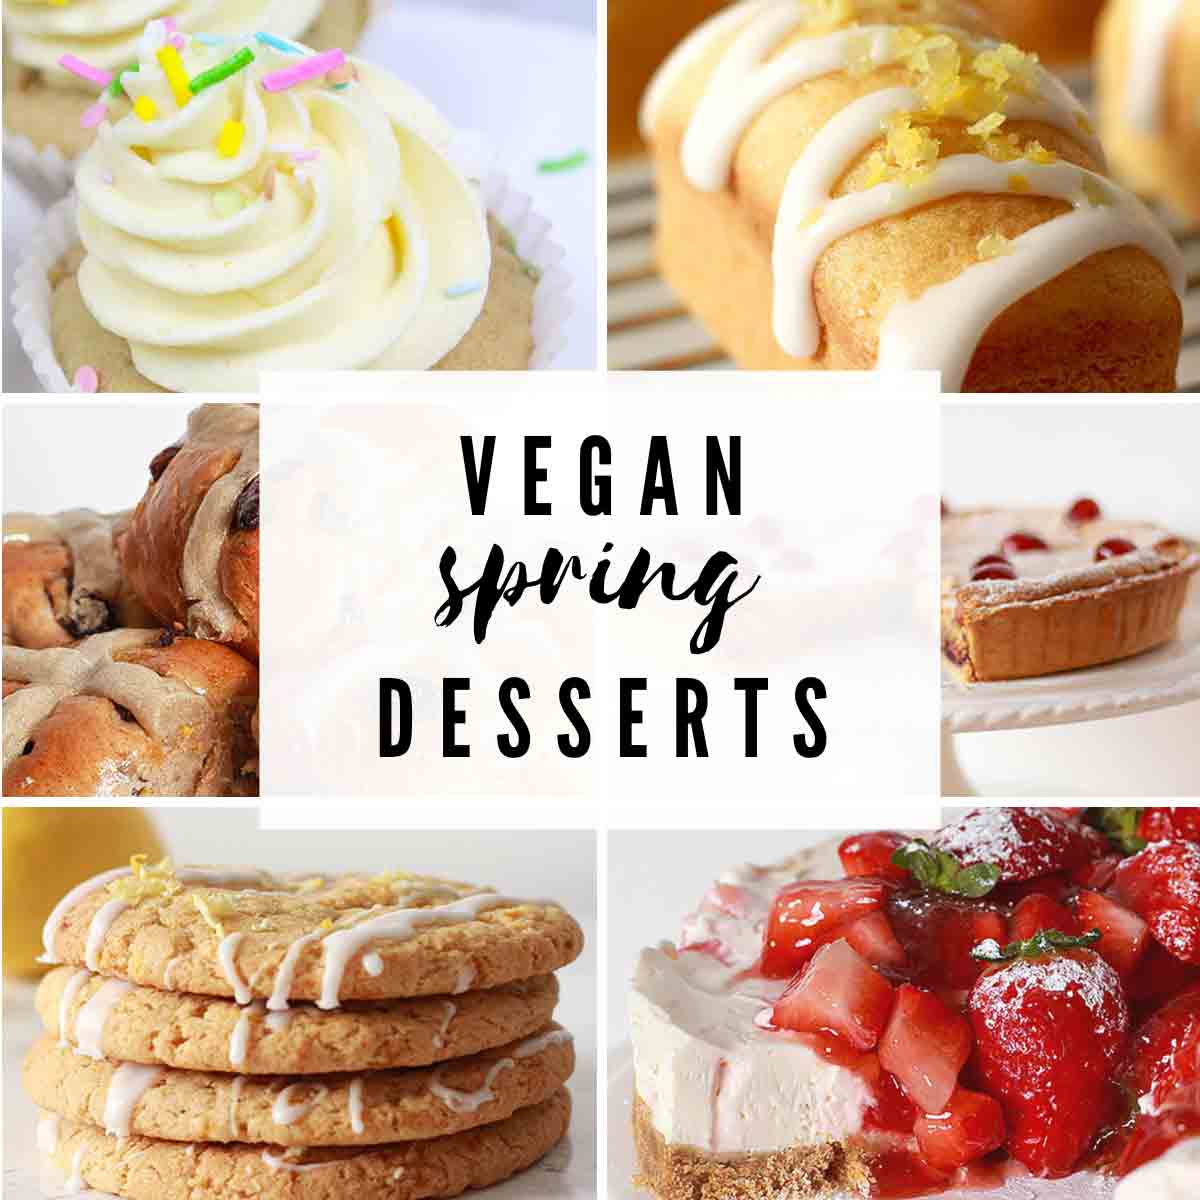 6 Images Of Desserts With Text Overlay That Reads 'vegan Spring Desserts'